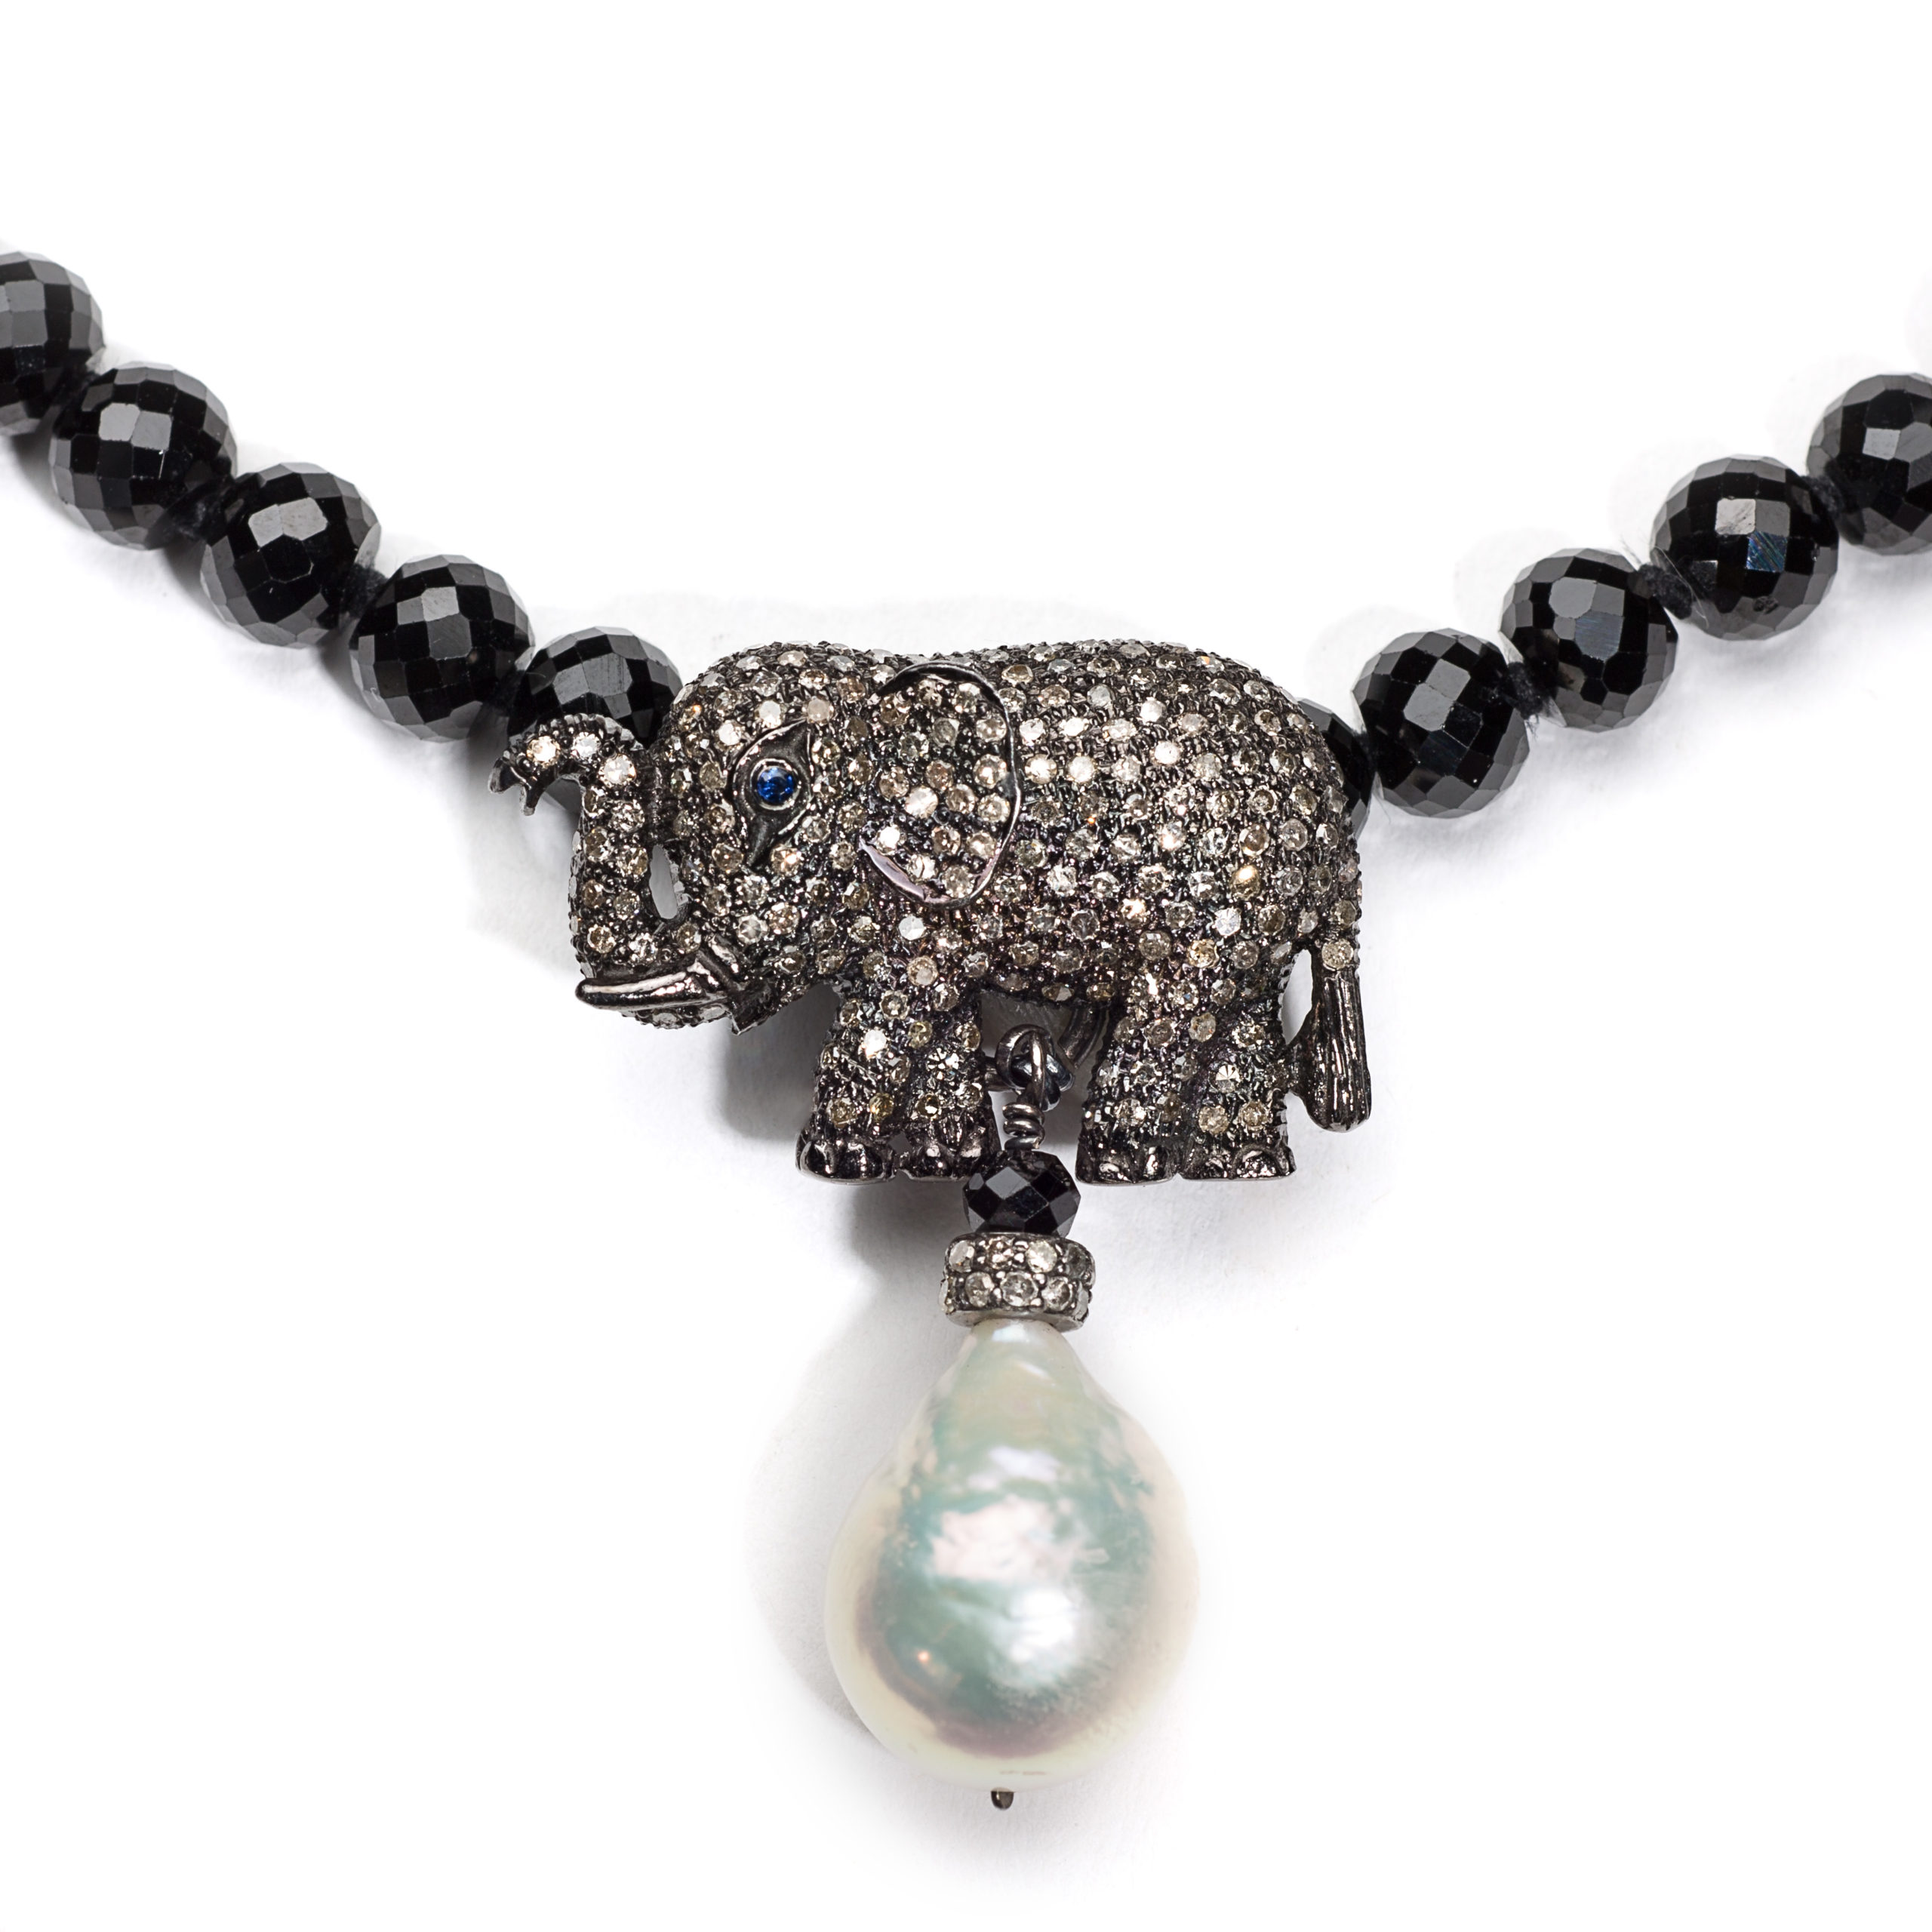 Pave diamond elephant and pearl pendant on necklace